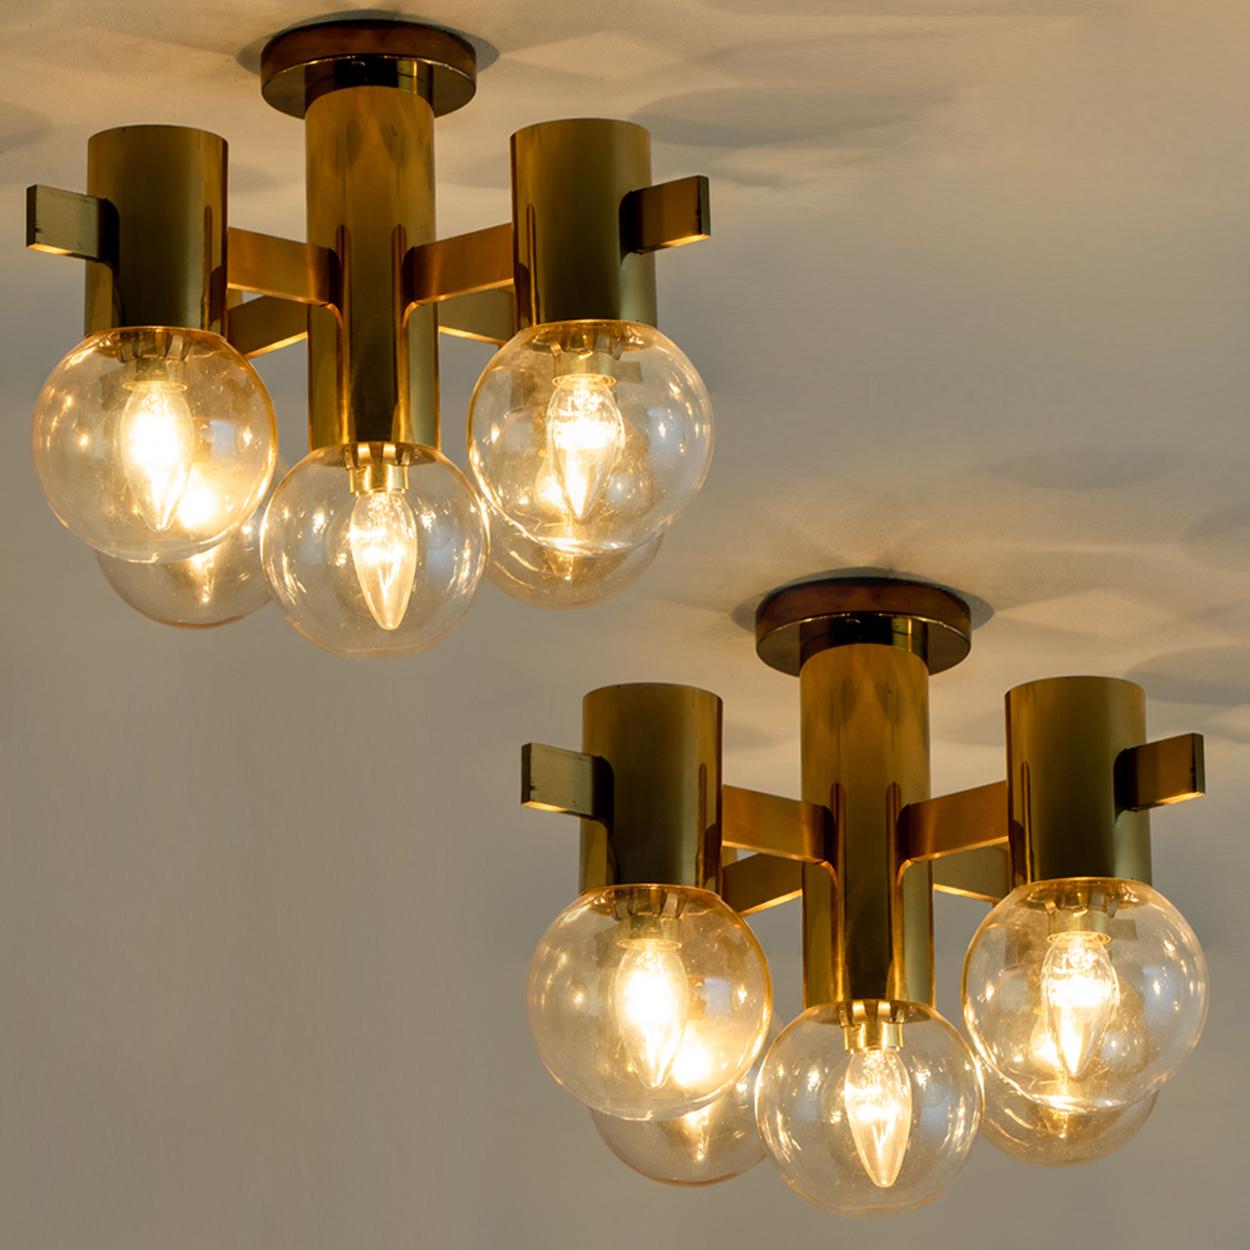 Large Brass and Glass Light Fixture in the Style of Jacobsson, 1960s For Sale 2